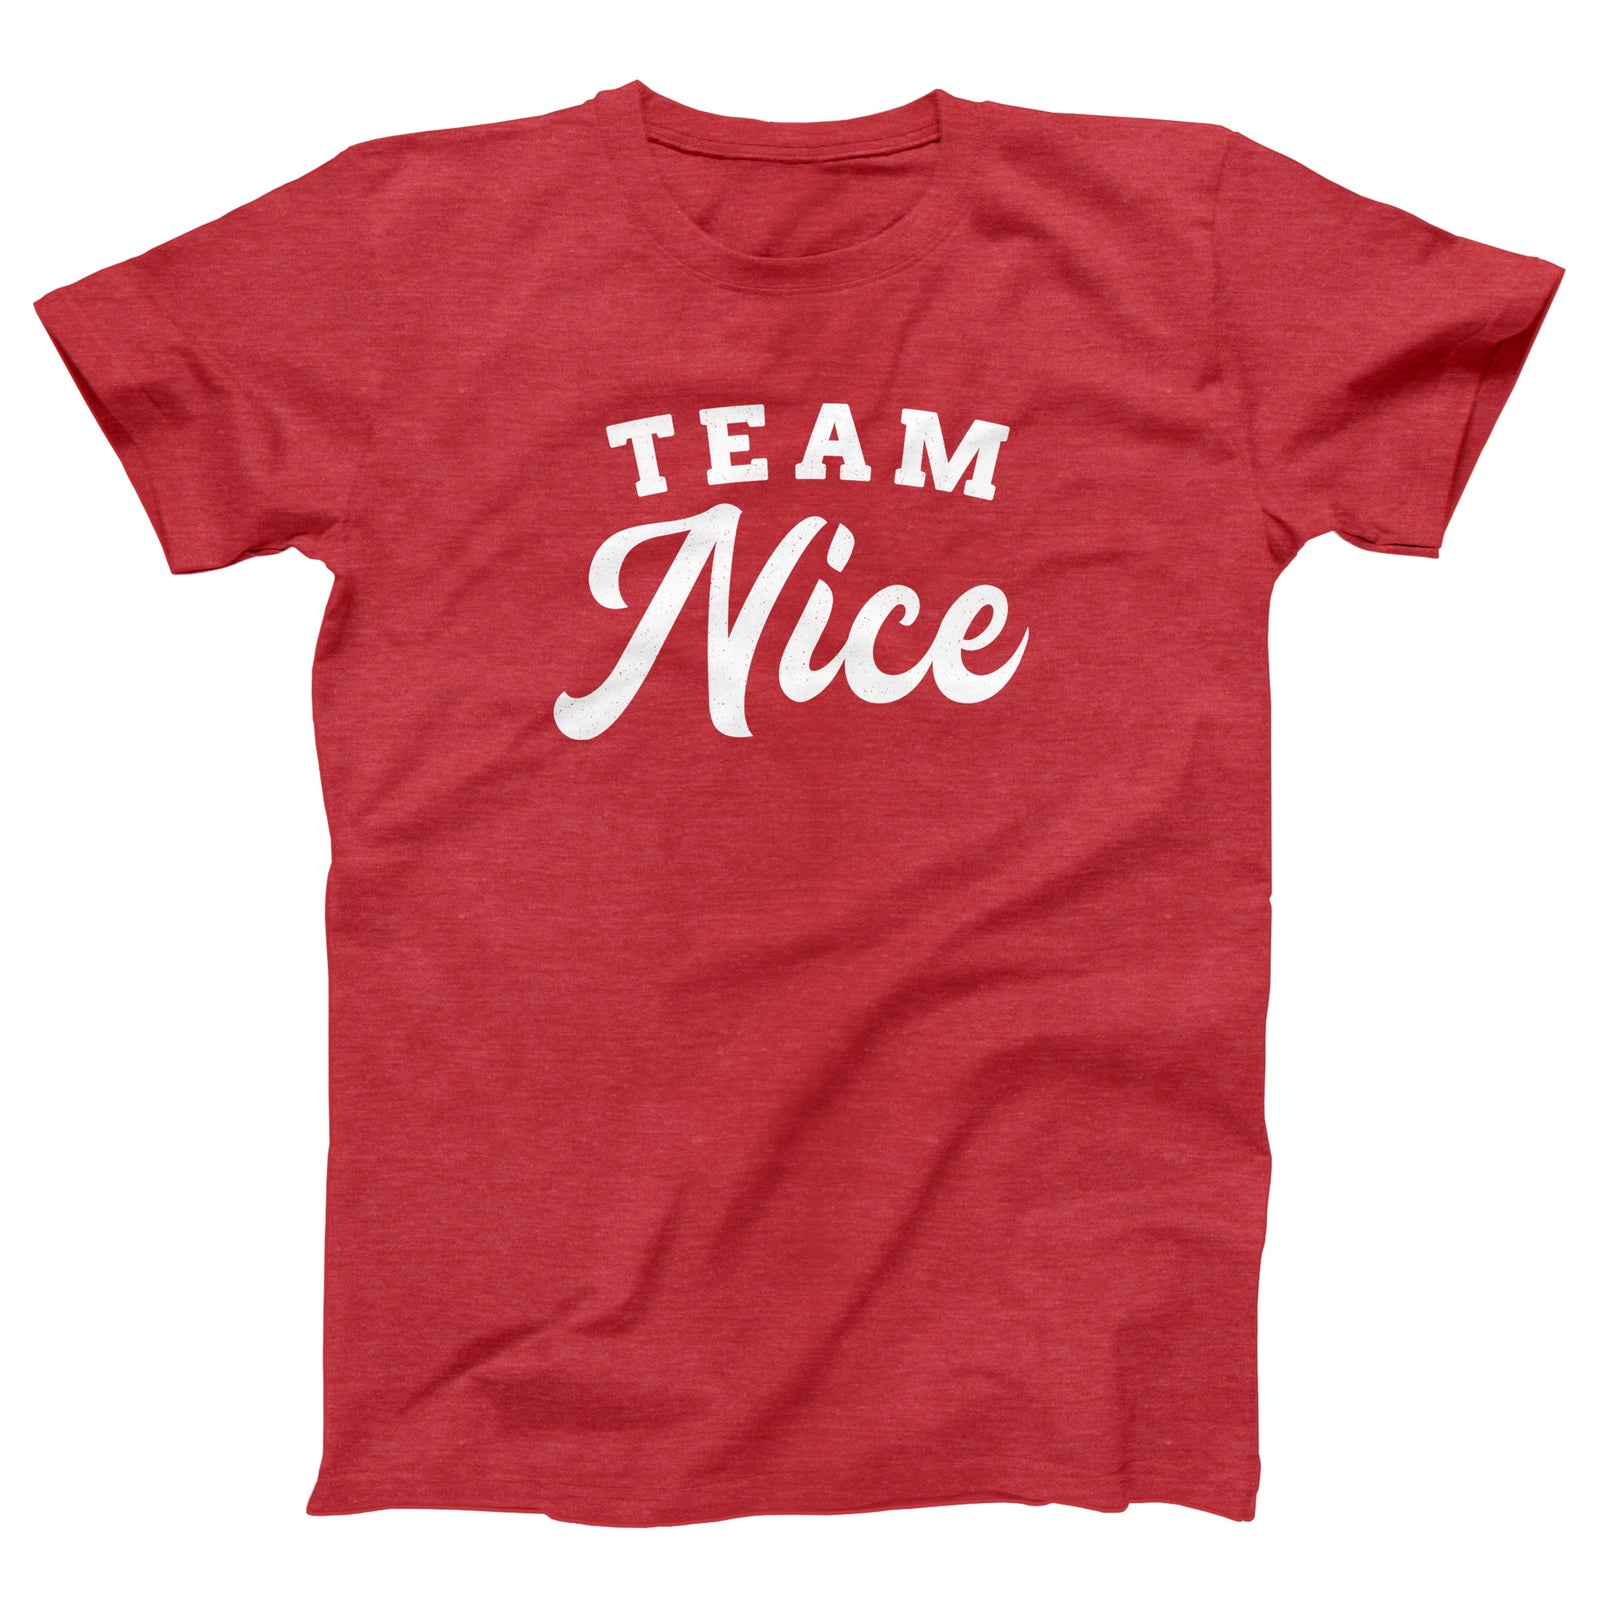 //cdn.shopify.com/s/files/1/0274/2488/2766/products/team-nice-menunisex-t-shirt-803841_5000x.jpg?v=1639020579 5000w,
    //cdn.shopify.com/s/files/1/0274/2488/2766/products/team-nice-menunisex-t-shirt-803841_4500x.jpg?v=1639020579 4500w,
    //cdn.shopify.com/s/files/1/0274/2488/2766/products/team-nice-menunisex-t-shirt-803841_4000x.jpg?v=1639020579 4000w,
    //cdn.shopify.com/s/files/1/0274/2488/2766/products/team-nice-menunisex-t-shirt-803841_3500x.jpg?v=1639020579 3500w,
    //cdn.shopify.com/s/files/1/0274/2488/2766/products/team-nice-menunisex-t-shirt-803841_3000x.jpg?v=1639020579 3000w,
    //cdn.shopify.com/s/files/1/0274/2488/2766/products/team-nice-menunisex-t-shirt-803841_2500x.jpg?v=1639020579 2500w,
    //cdn.shopify.com/s/files/1/0274/2488/2766/products/team-nice-menunisex-t-shirt-803841_2000x.jpg?v=1639020579 2000w,
    //cdn.shopify.com/s/files/1/0274/2488/2766/products/team-nice-menunisex-t-shirt-803841_1800x.jpg?v=1639020579 1800w,
    //cdn.shopify.com/s/files/1/0274/2488/2766/products/team-nice-menunisex-t-shirt-803841_1600x.jpg?v=1639020579 1600w,
    //cdn.shopify.com/s/files/1/0274/2488/2766/products/team-nice-menunisex-t-shirt-803841_1400x.jpg?v=1639020579 1400w,
    //cdn.shopify.com/s/files/1/0274/2488/2766/products/team-nice-menunisex-t-shirt-803841_1200x.jpg?v=1639020579 1200w,
    //cdn.shopify.com/s/files/1/0274/2488/2766/products/team-nice-menunisex-t-shirt-803841_1000x.jpg?v=1639020579 1000w,
    //cdn.shopify.com/s/files/1/0274/2488/2766/products/team-nice-menunisex-t-shirt-803841_800x.jpg?v=1639020579 800w,
    //cdn.shopify.com/s/files/1/0274/2488/2766/products/team-nice-menunisex-t-shirt-803841_600x.jpg?v=1639020579 600w,
    //cdn.shopify.com/s/files/1/0274/2488/2766/products/team-nice-menunisex-t-shirt-803841_400x.jpg?v=1639020579 400w,
    //cdn.shopify.com/s/files/1/0274/2488/2766/products/team-nice-menunisex-t-shirt-803841_200x.jpg?v=1639020579 200w